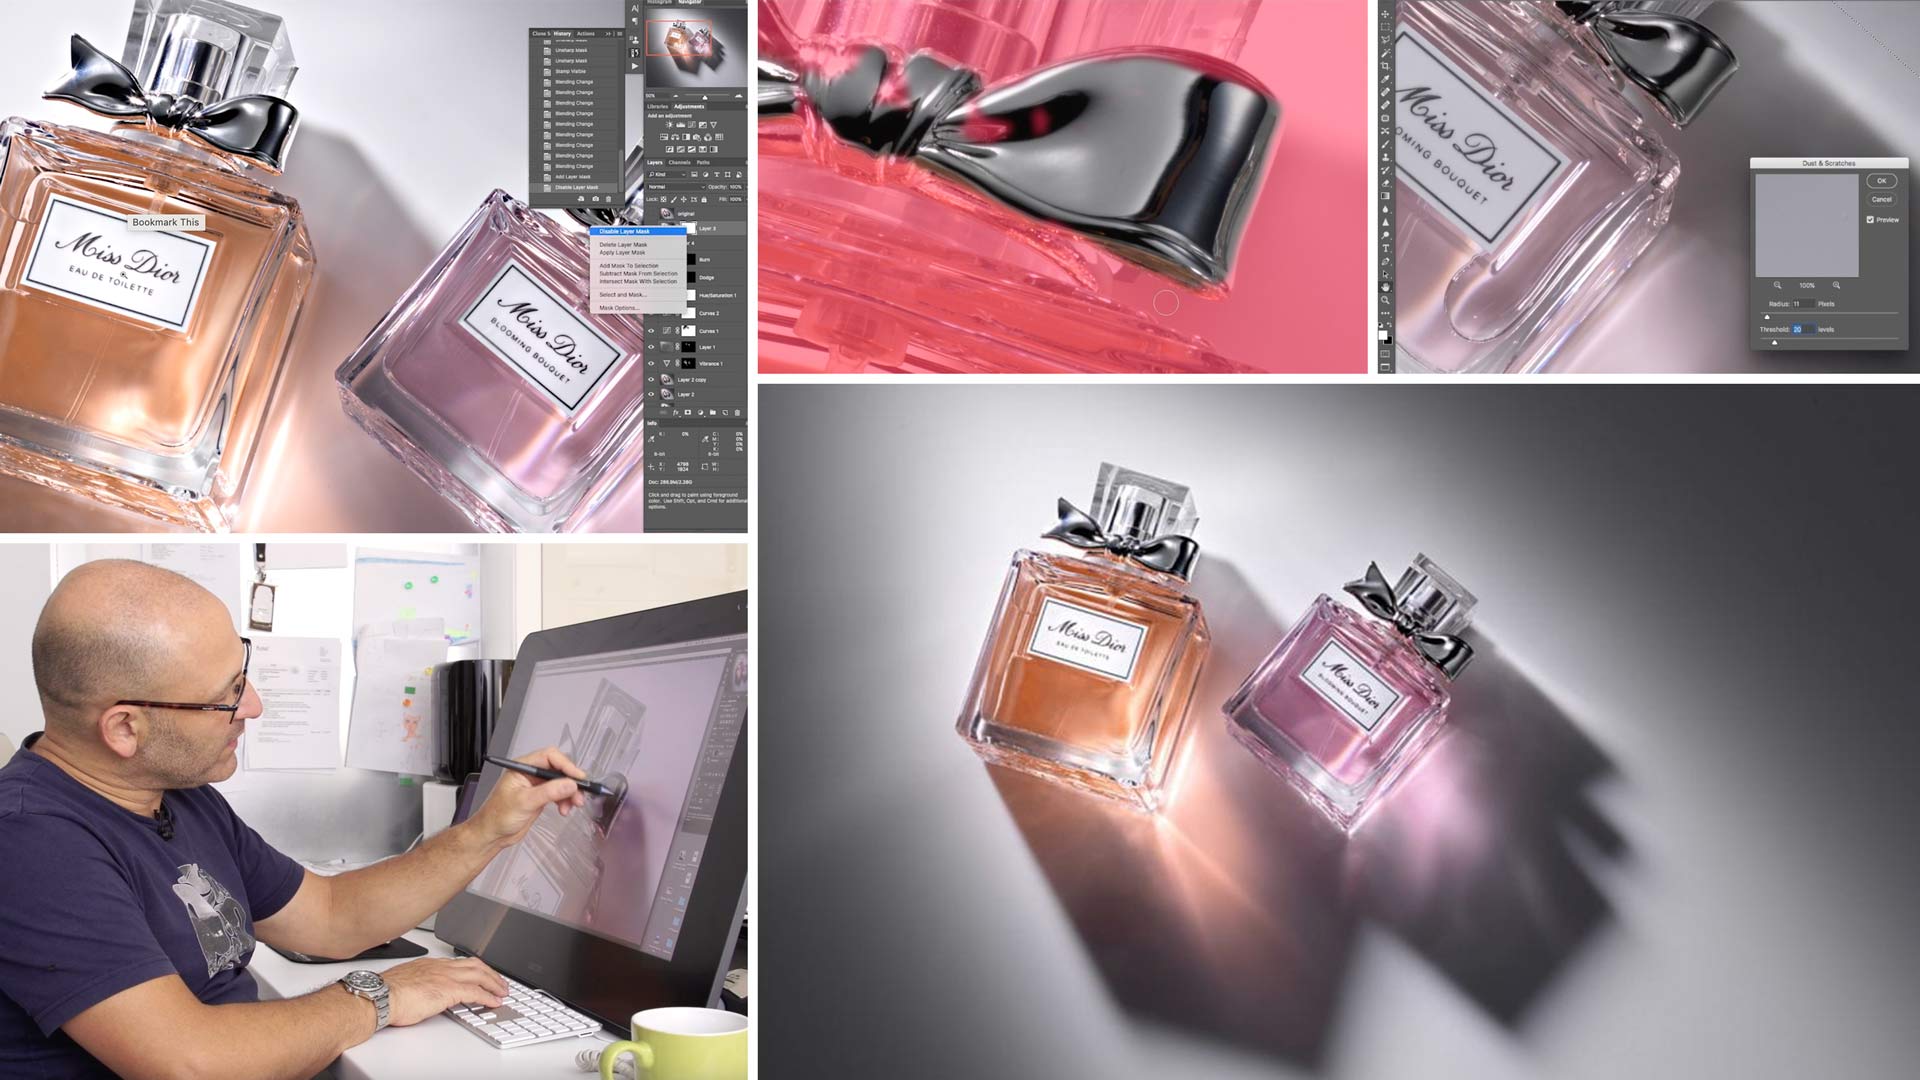 Dior Perfume Bottle Photography | Post-Production